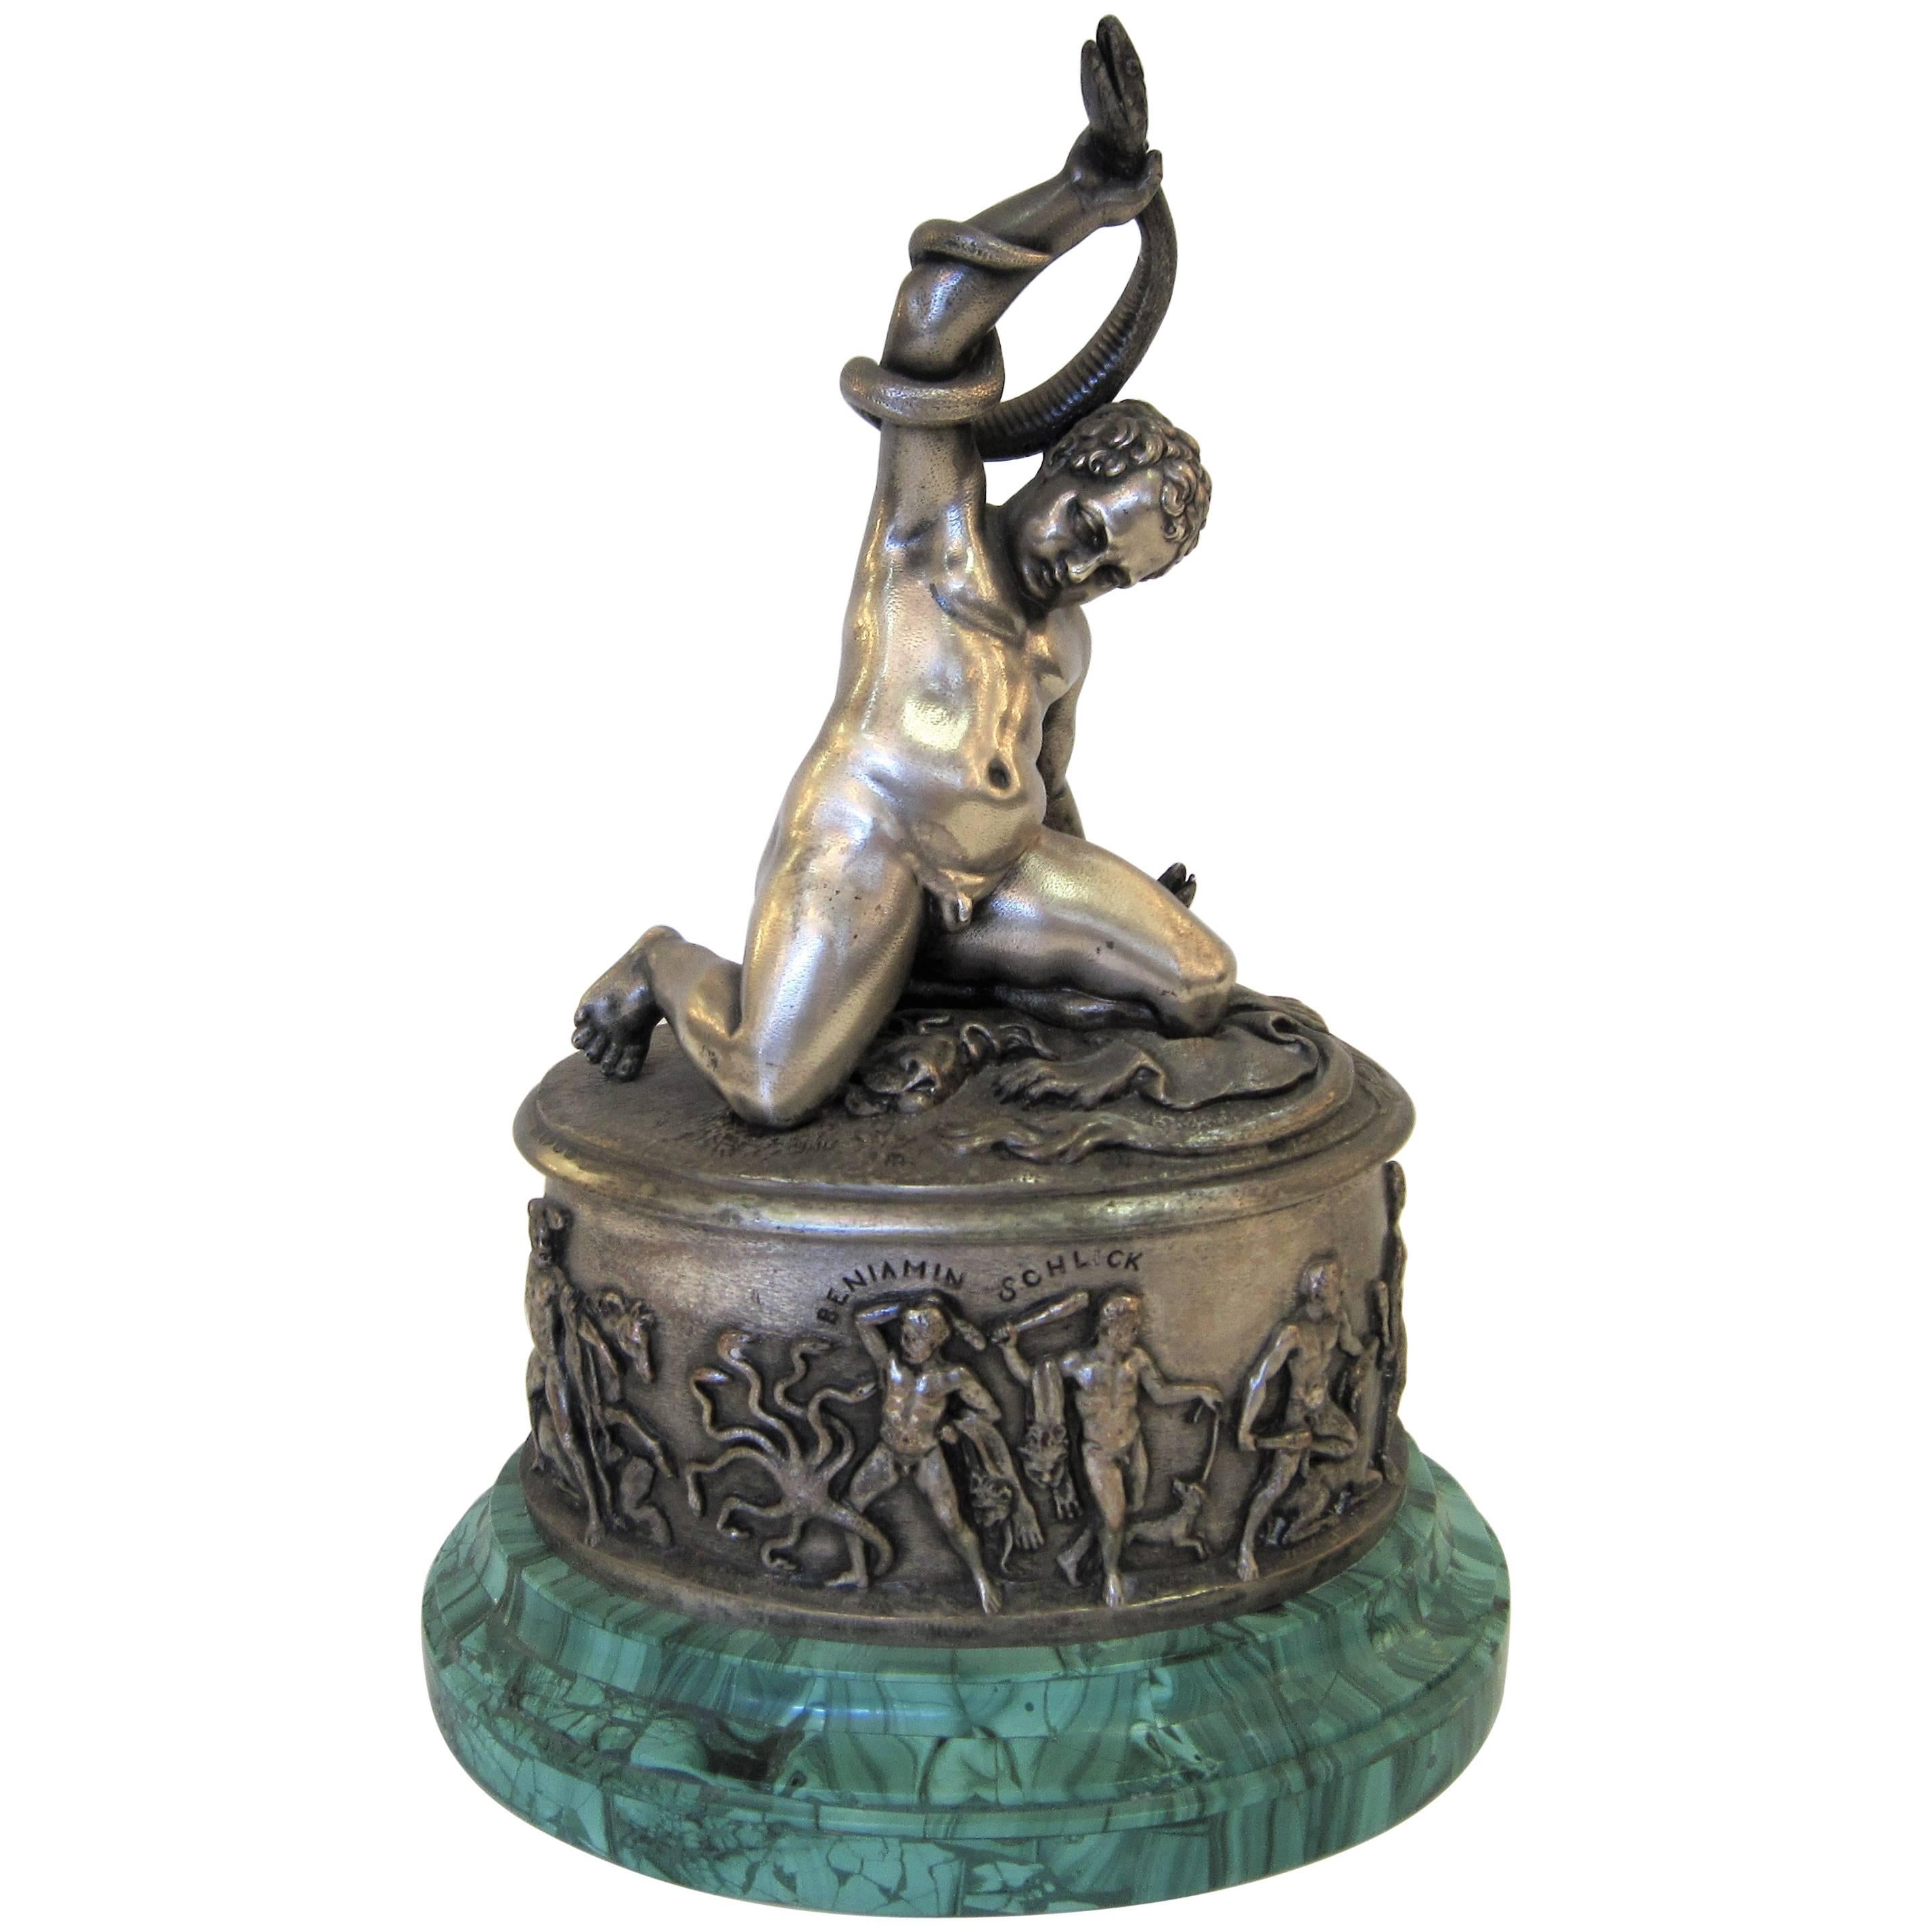  Small Sculpture of a Nude Boy on Malachite Base, Benjamin Schlick Mid-19th Cent For Sale